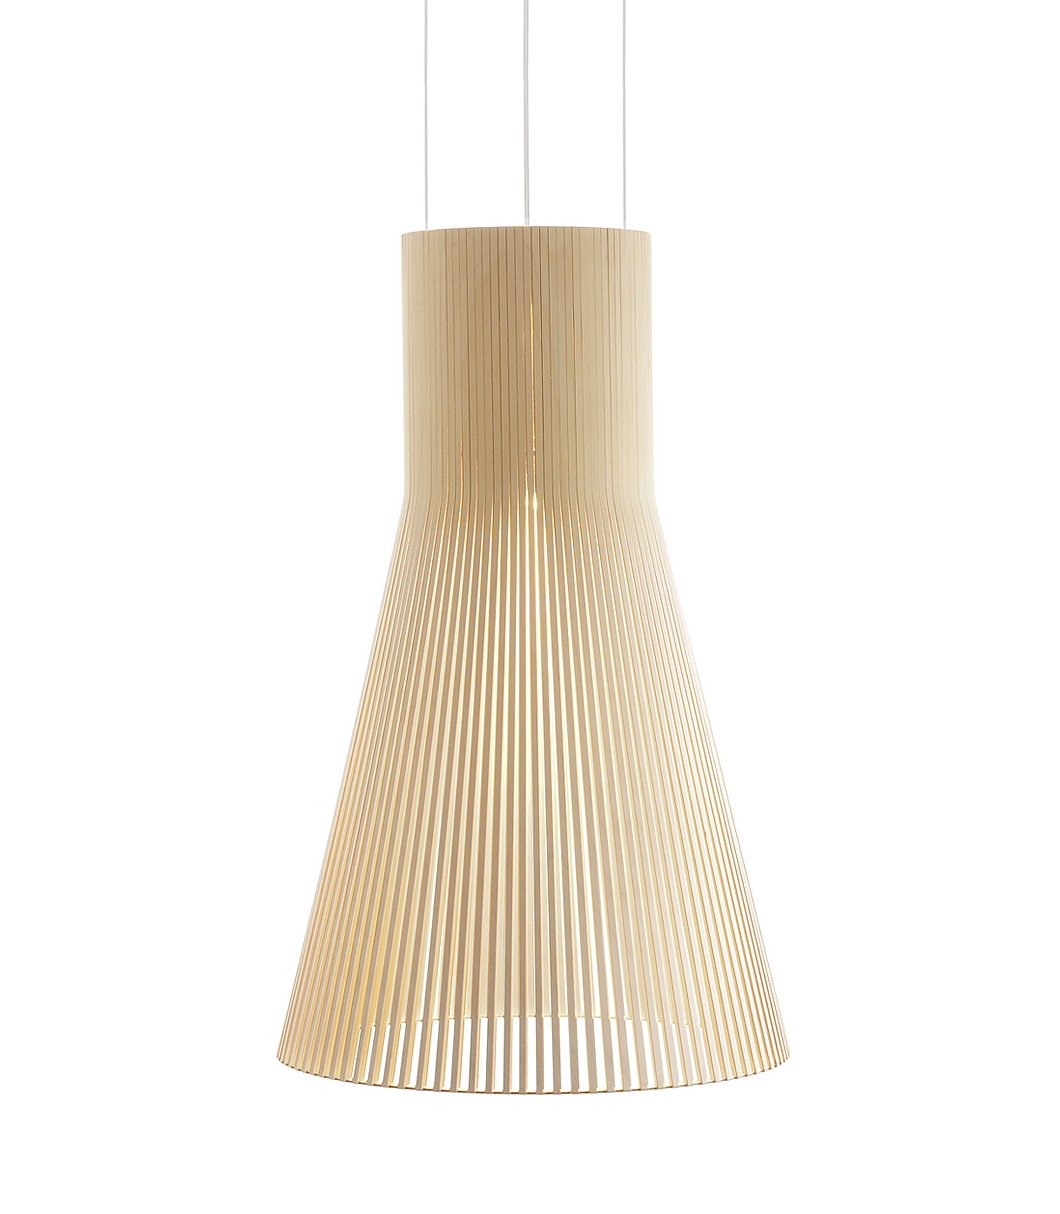 Magnum 4202 pendant lamp is available in natural birch